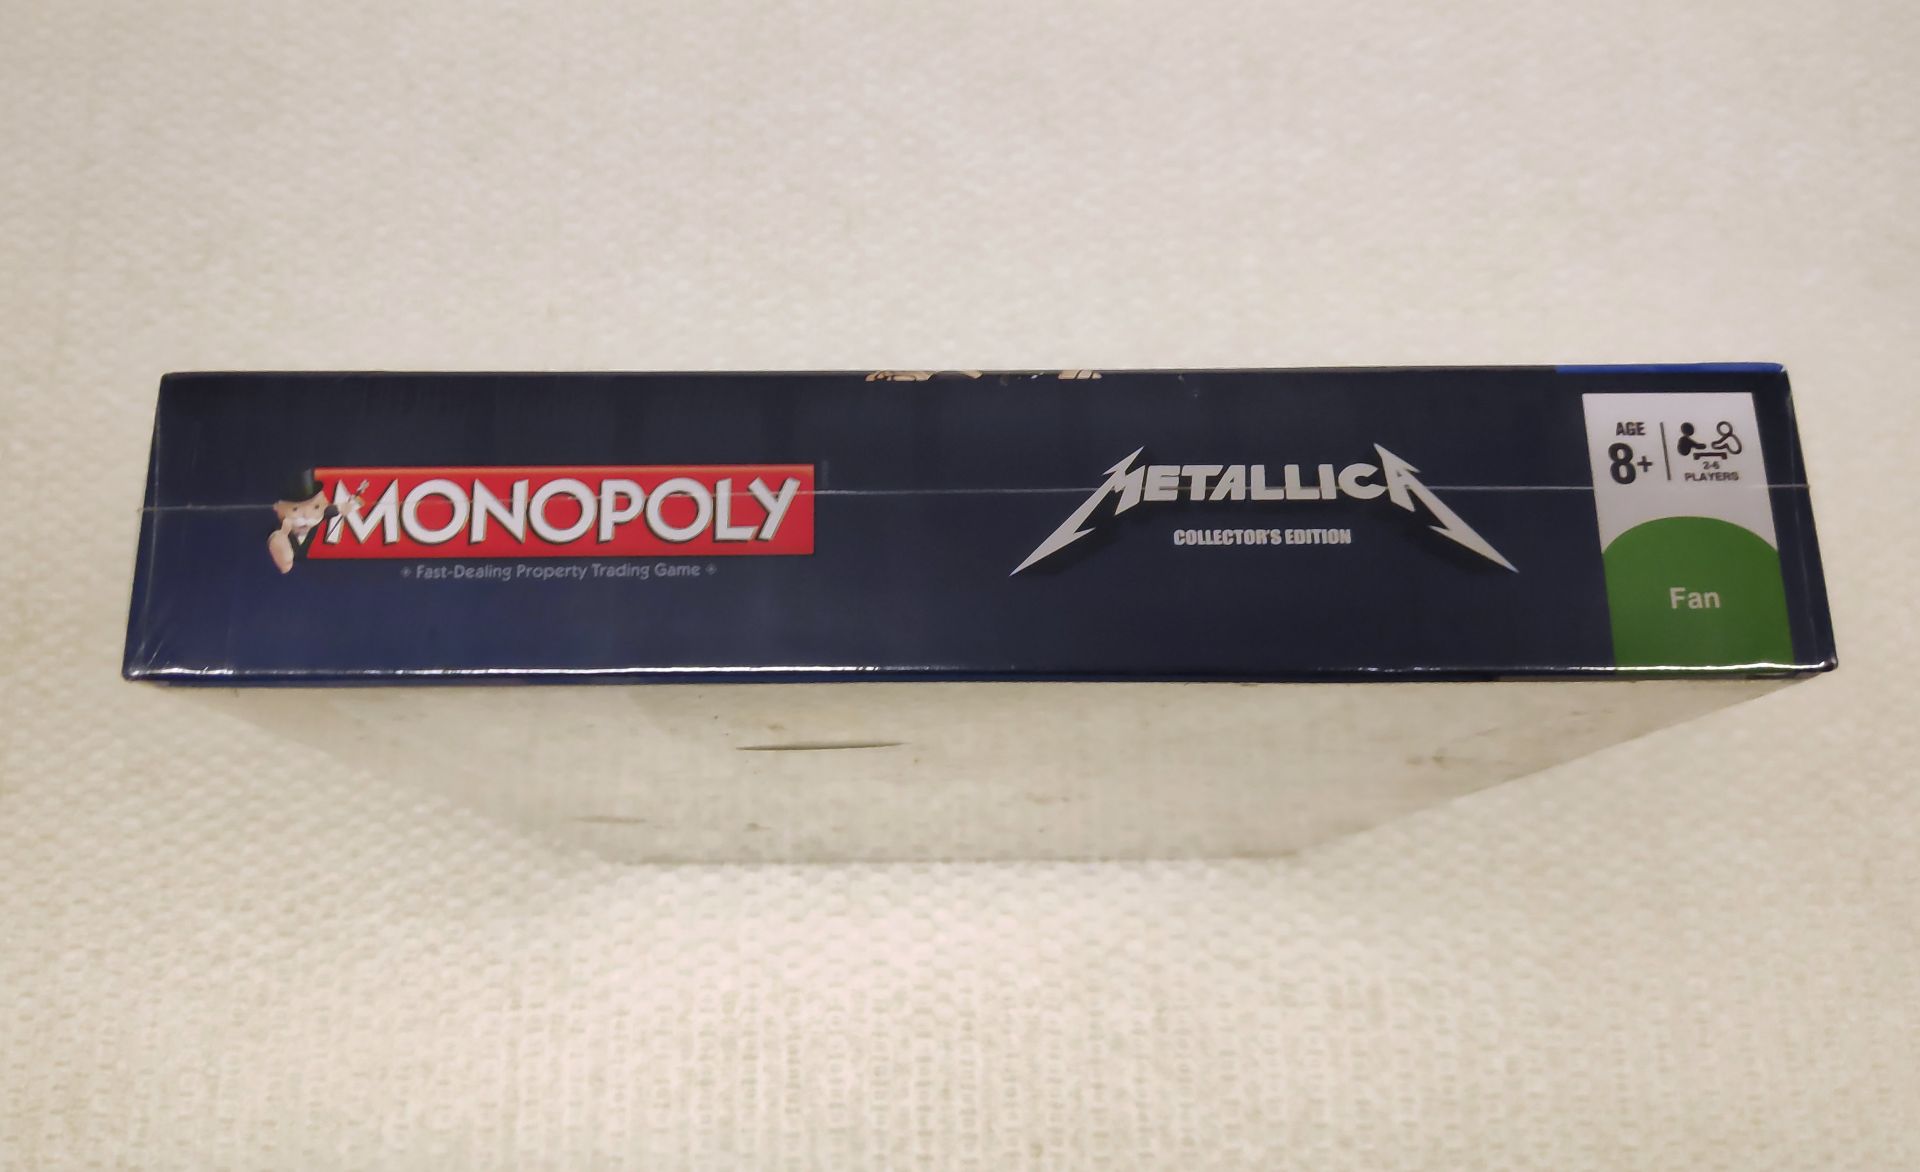 1 x Metallica Collector's Edition Monopoly - New/Sealed - HTYS170 - CL720 - Location: Altrincham WA1 - Image 7 of 8